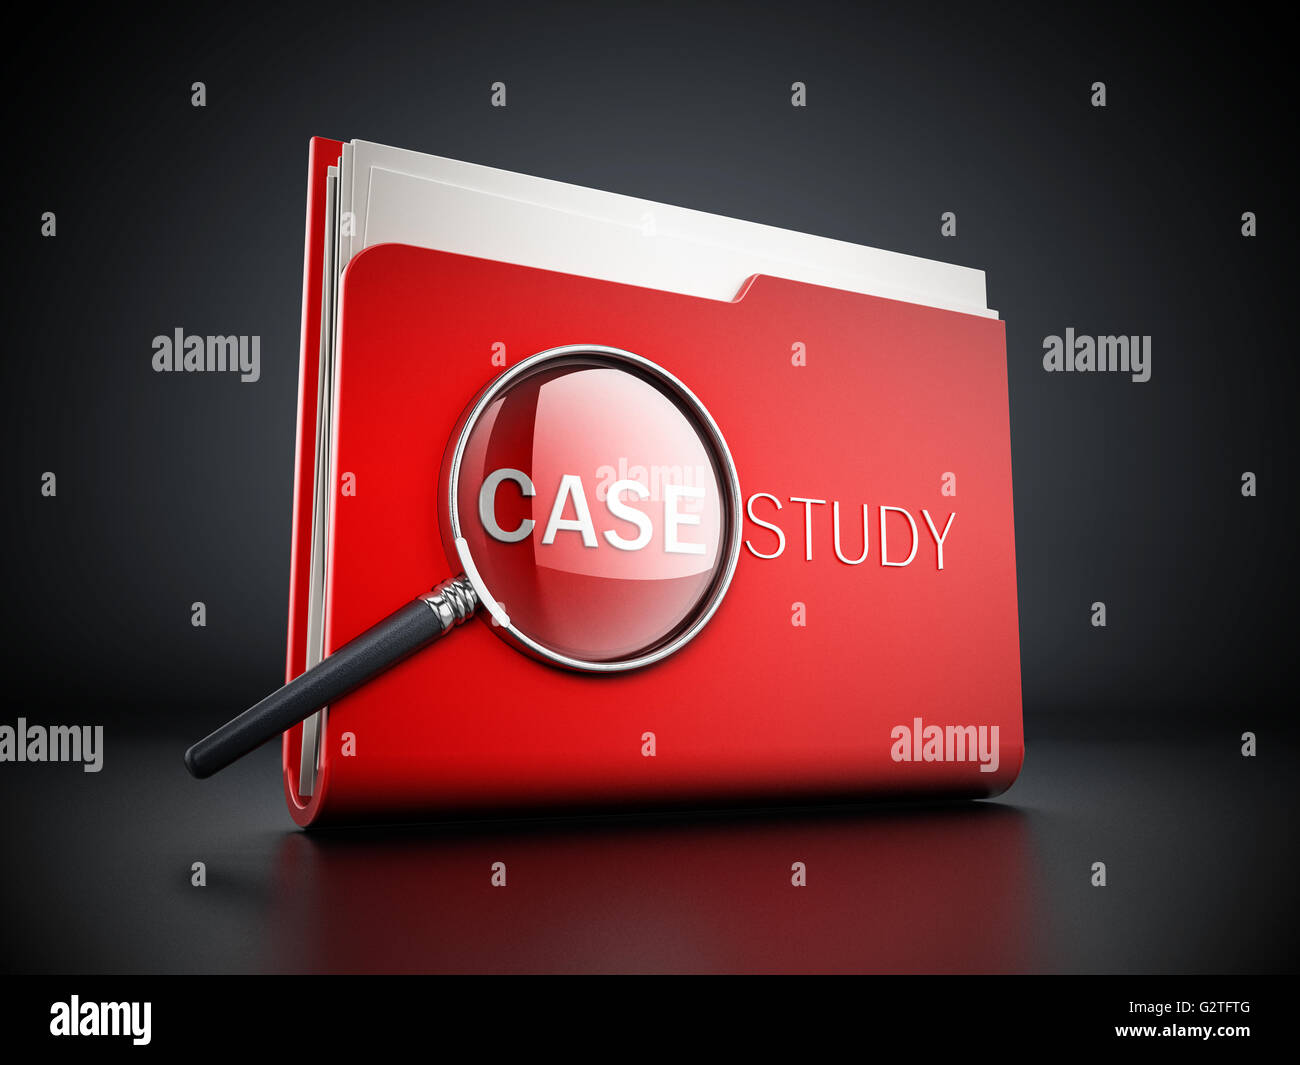 Case study text under magnifying glass standing on red folder. 3D illustration. Stock Photo